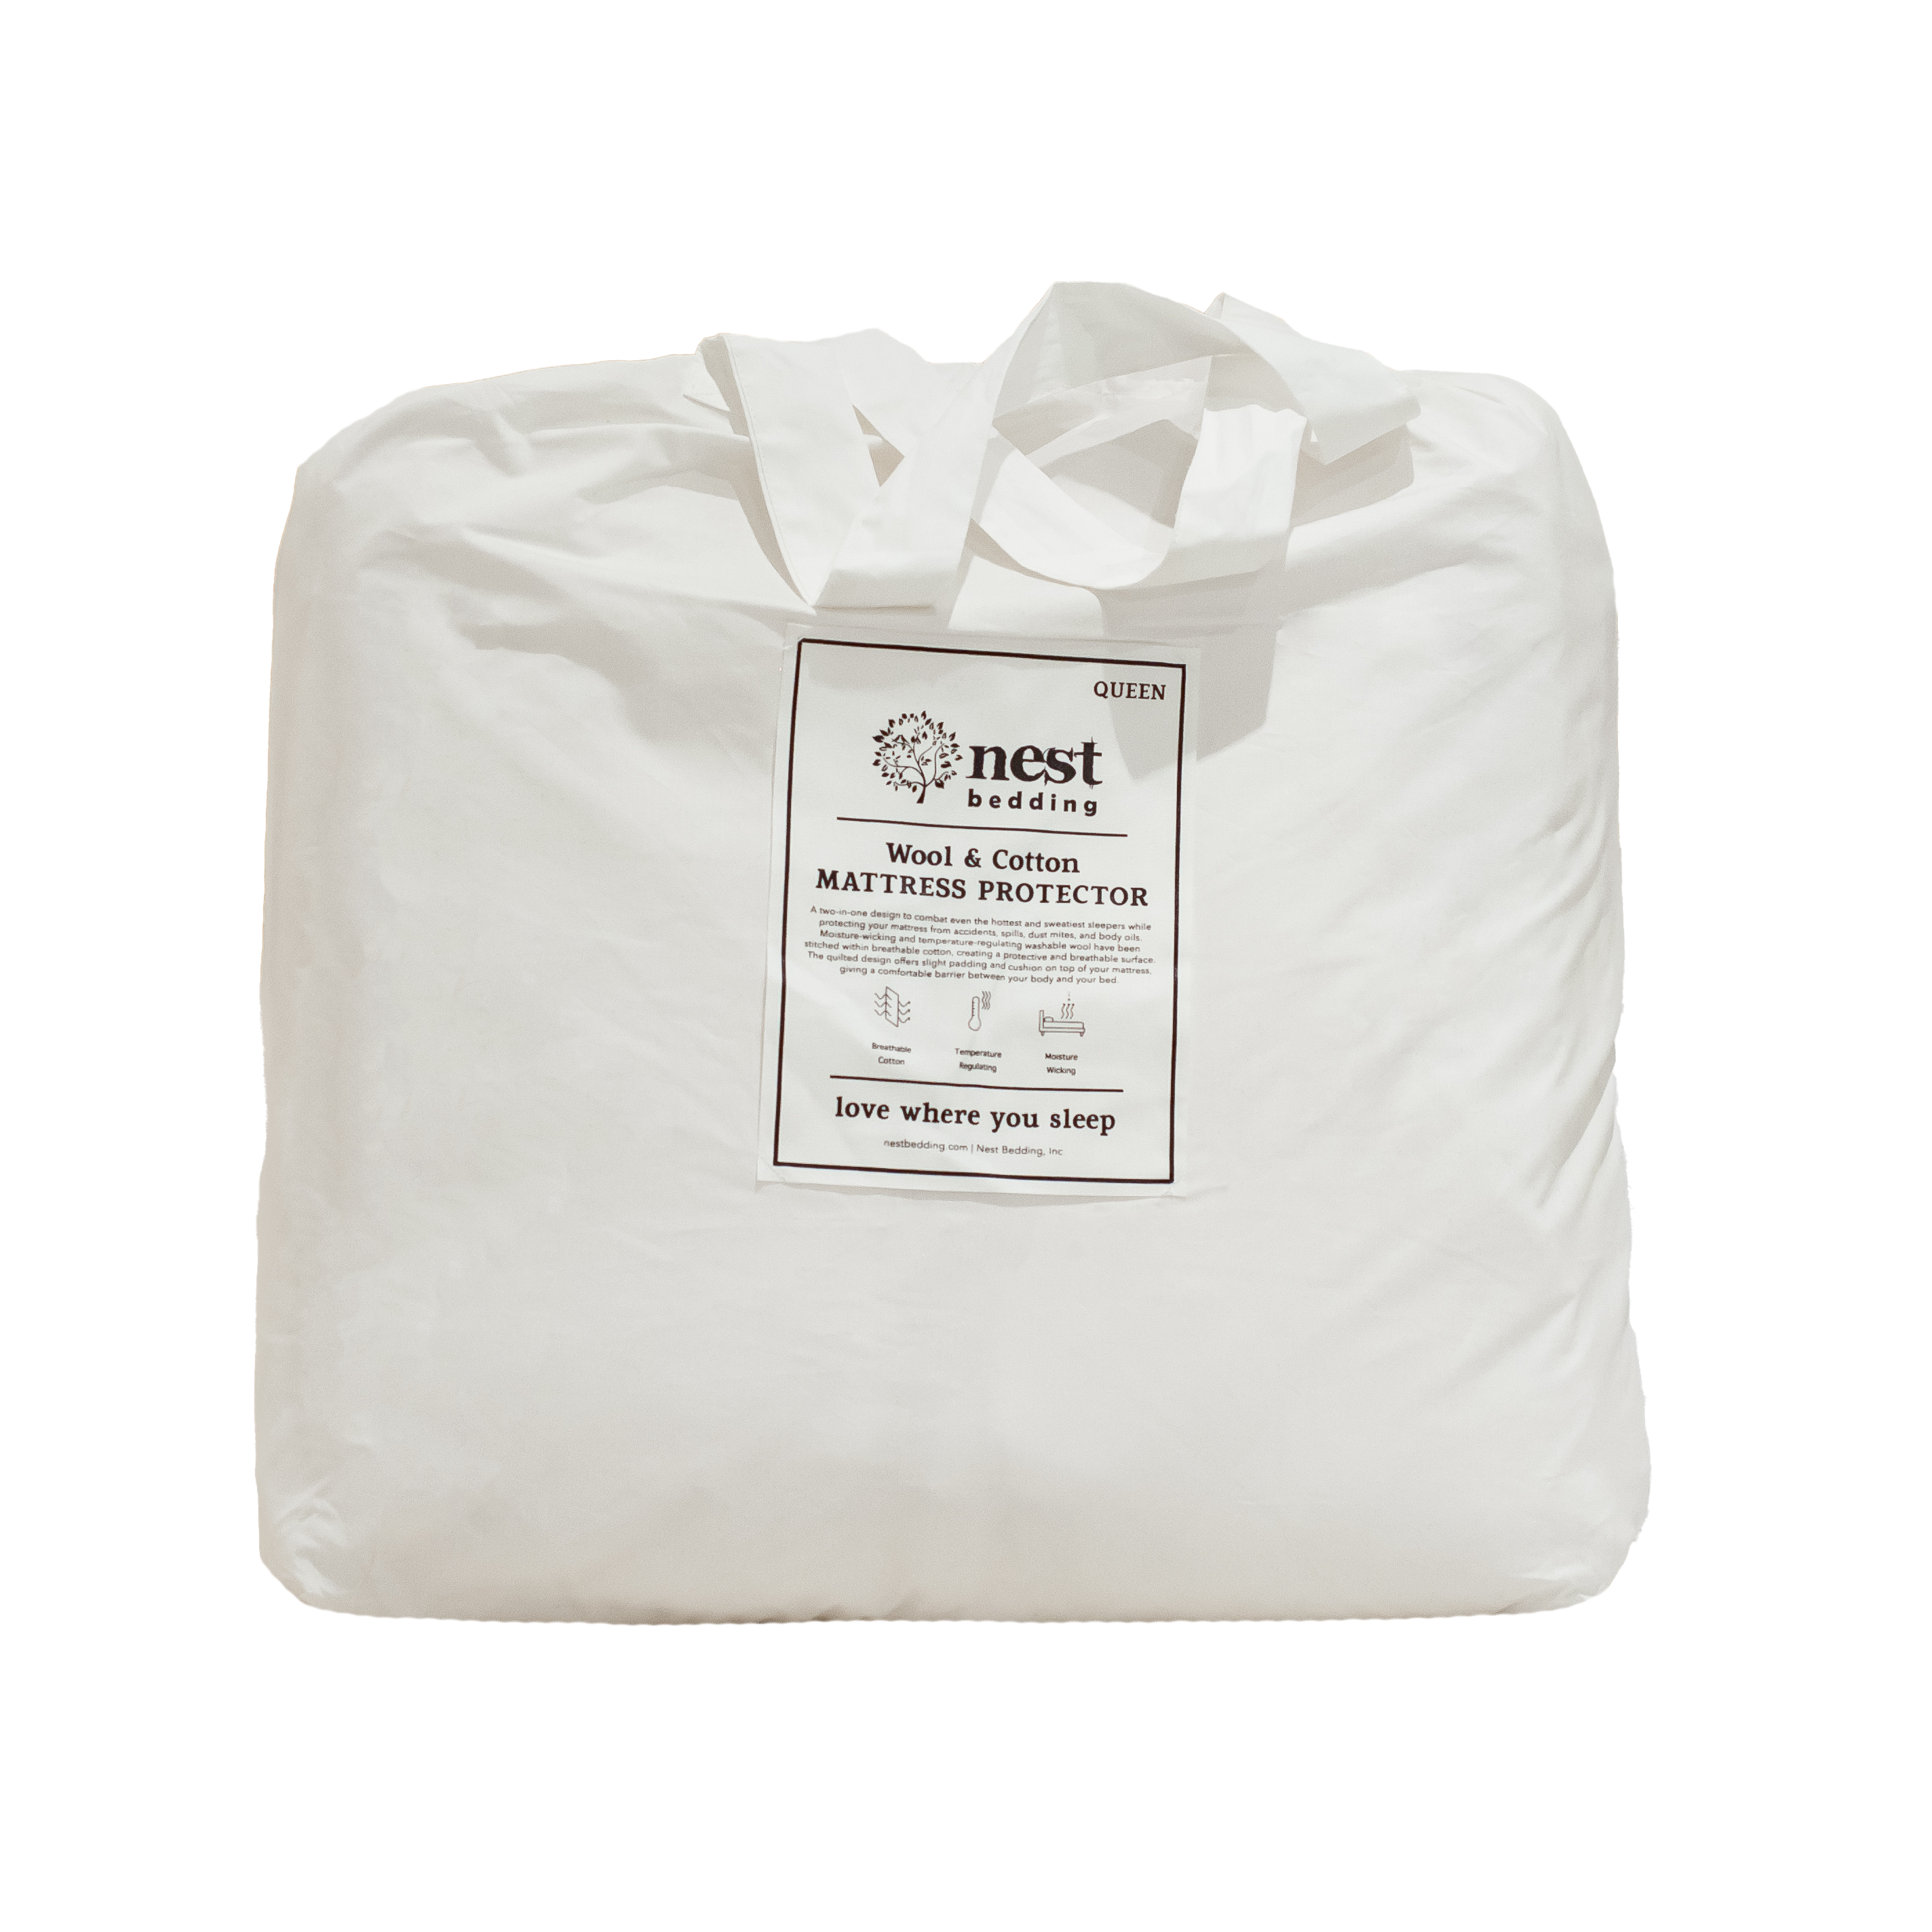 wool and cotton mattress protector in cotton carry tote